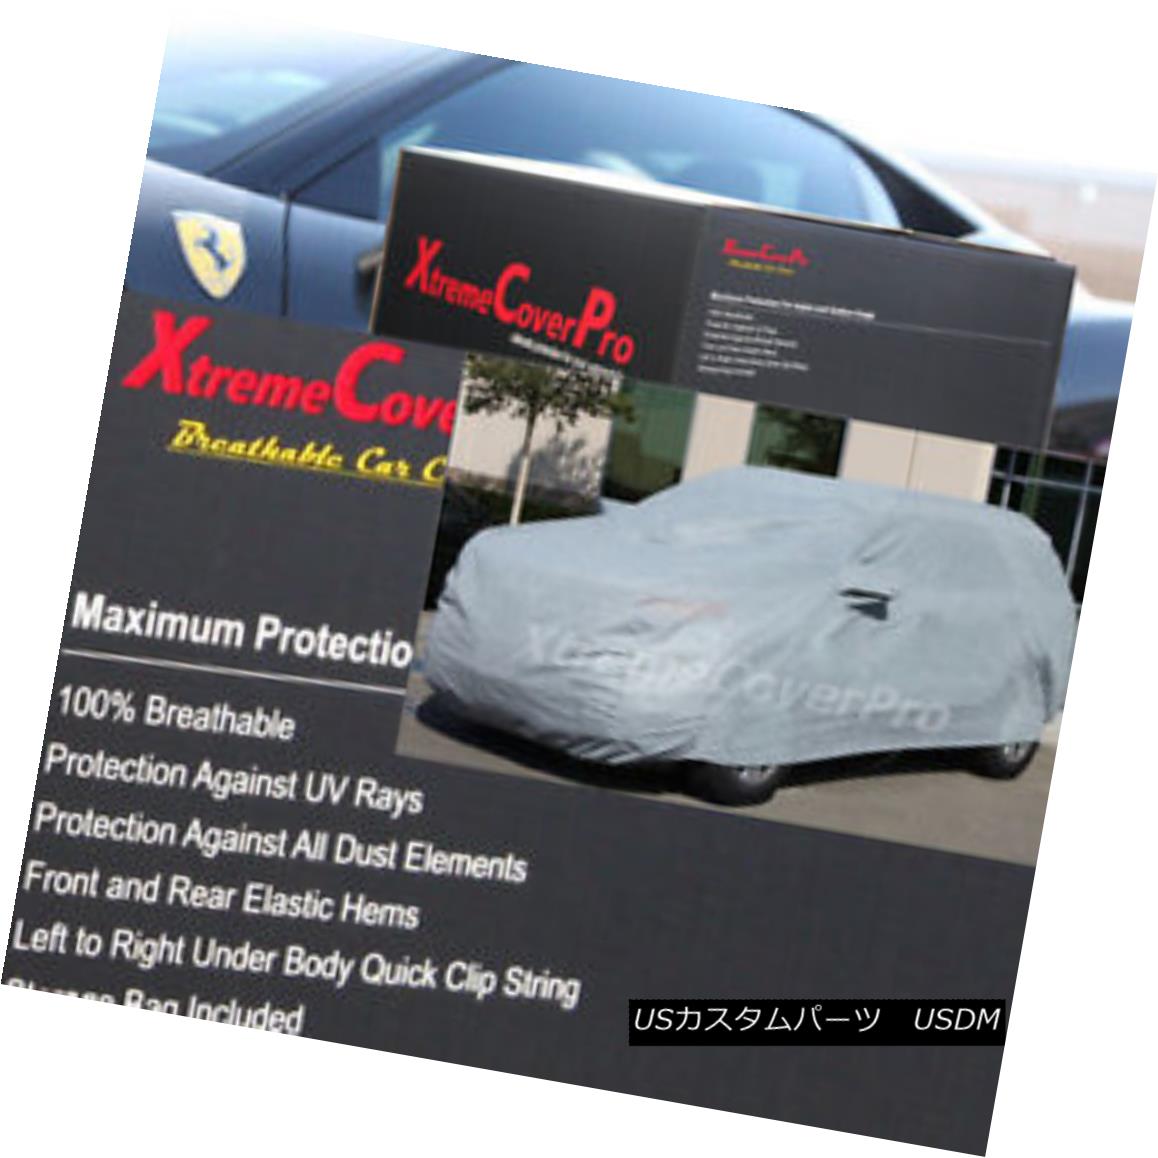 2015 BUICK ENCLAVE Breathable Car Cover w Mirror Pockets - Gray カーカバー 2015 BUICK ENCLAVE Breathable Car Cover w Mirror Pockets - Gray 2015 BUICK ENCLAVE通気性のある車カバー付き ミラーポケット - グレー